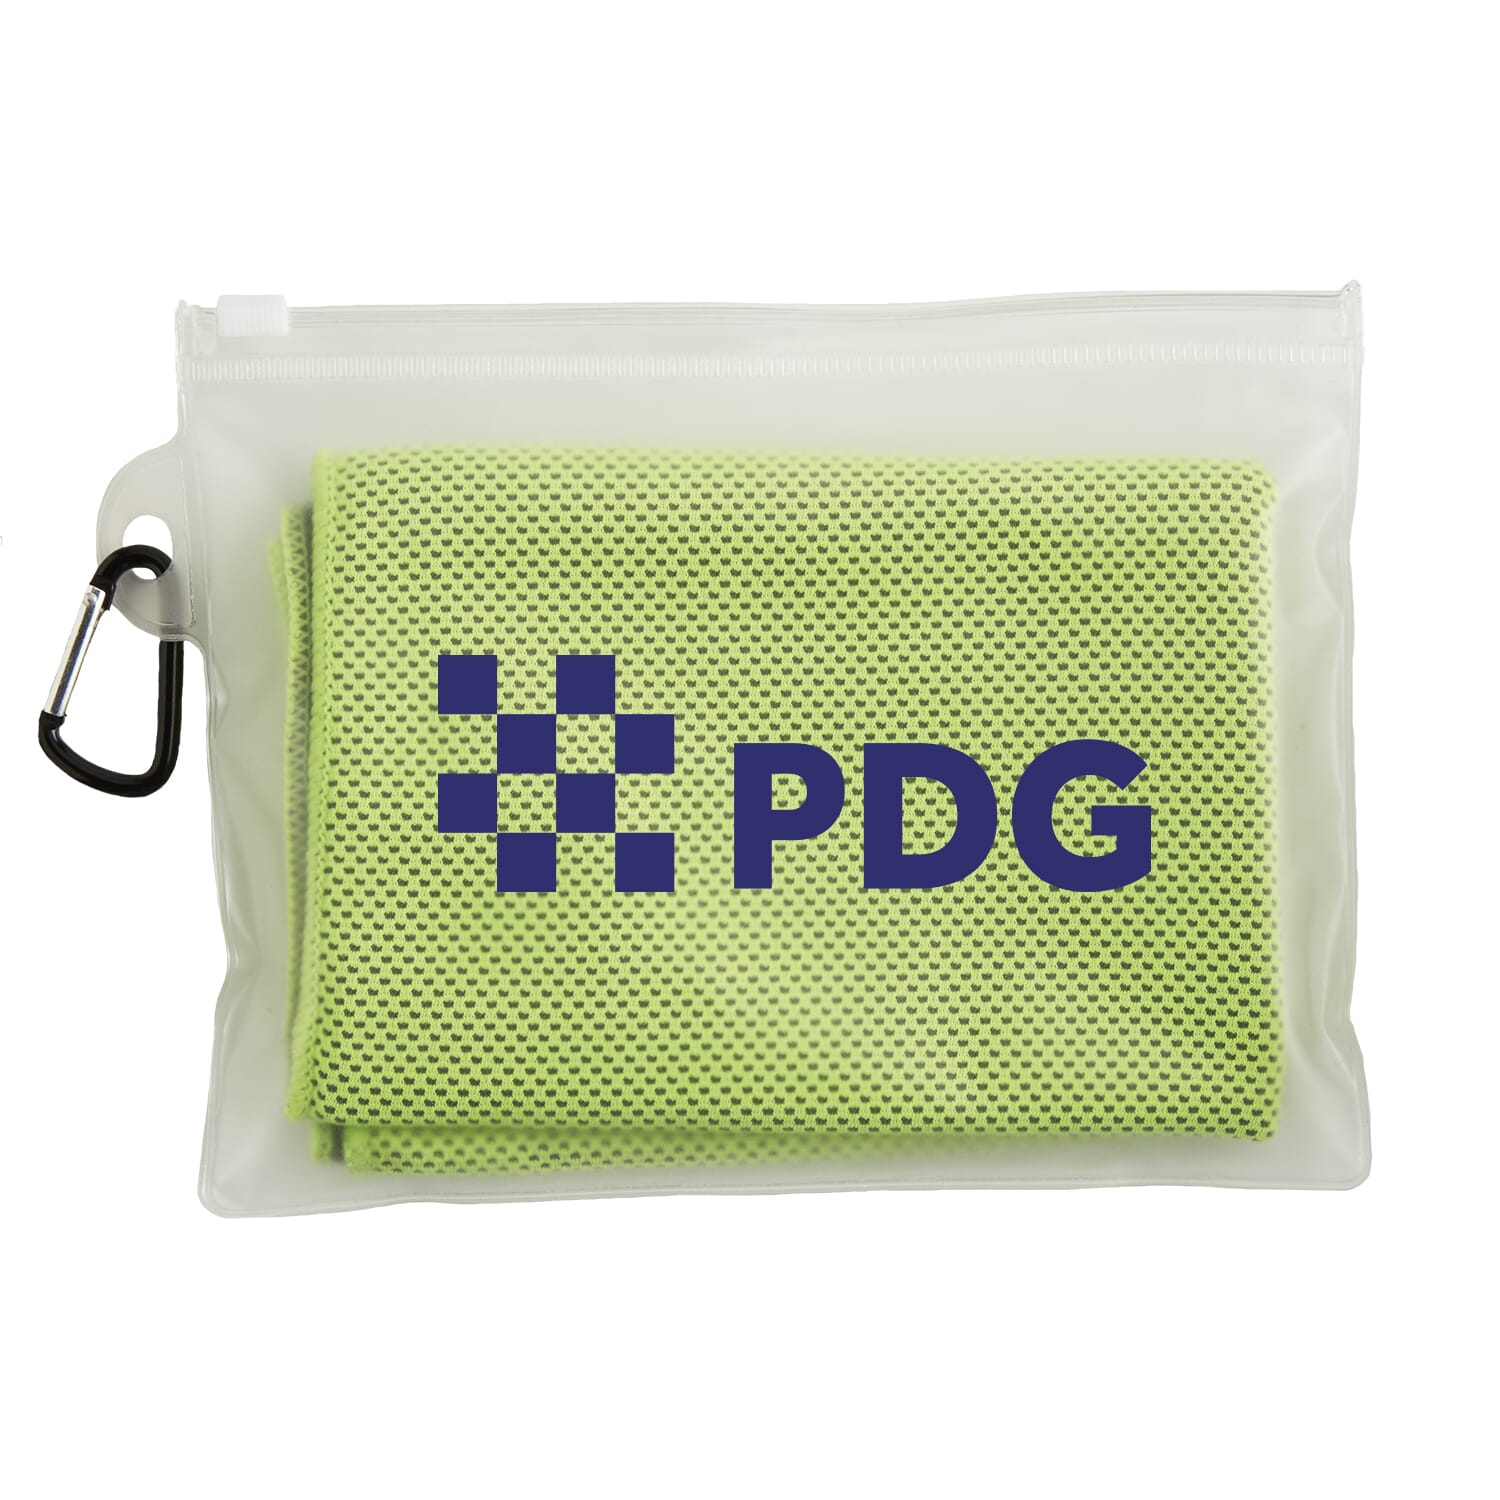 cooling towel in customized carry pouch with carabiner